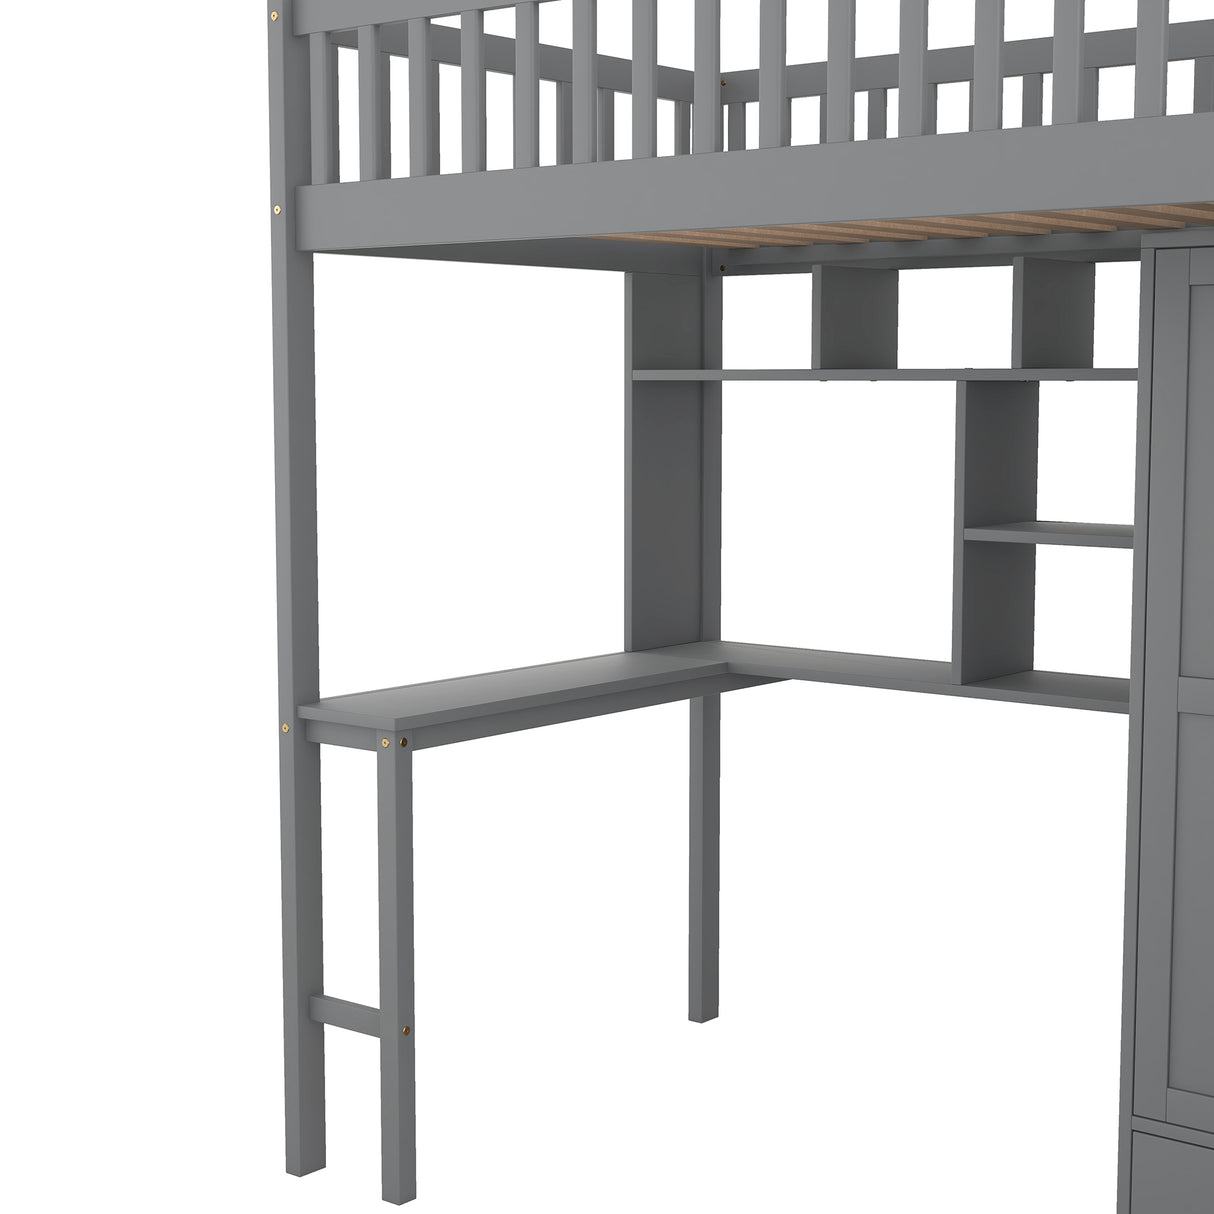 Twin size Loft Bed with Bookshelf,Drawers,Desk,and Wardrobe-Gray - Home Elegance USA